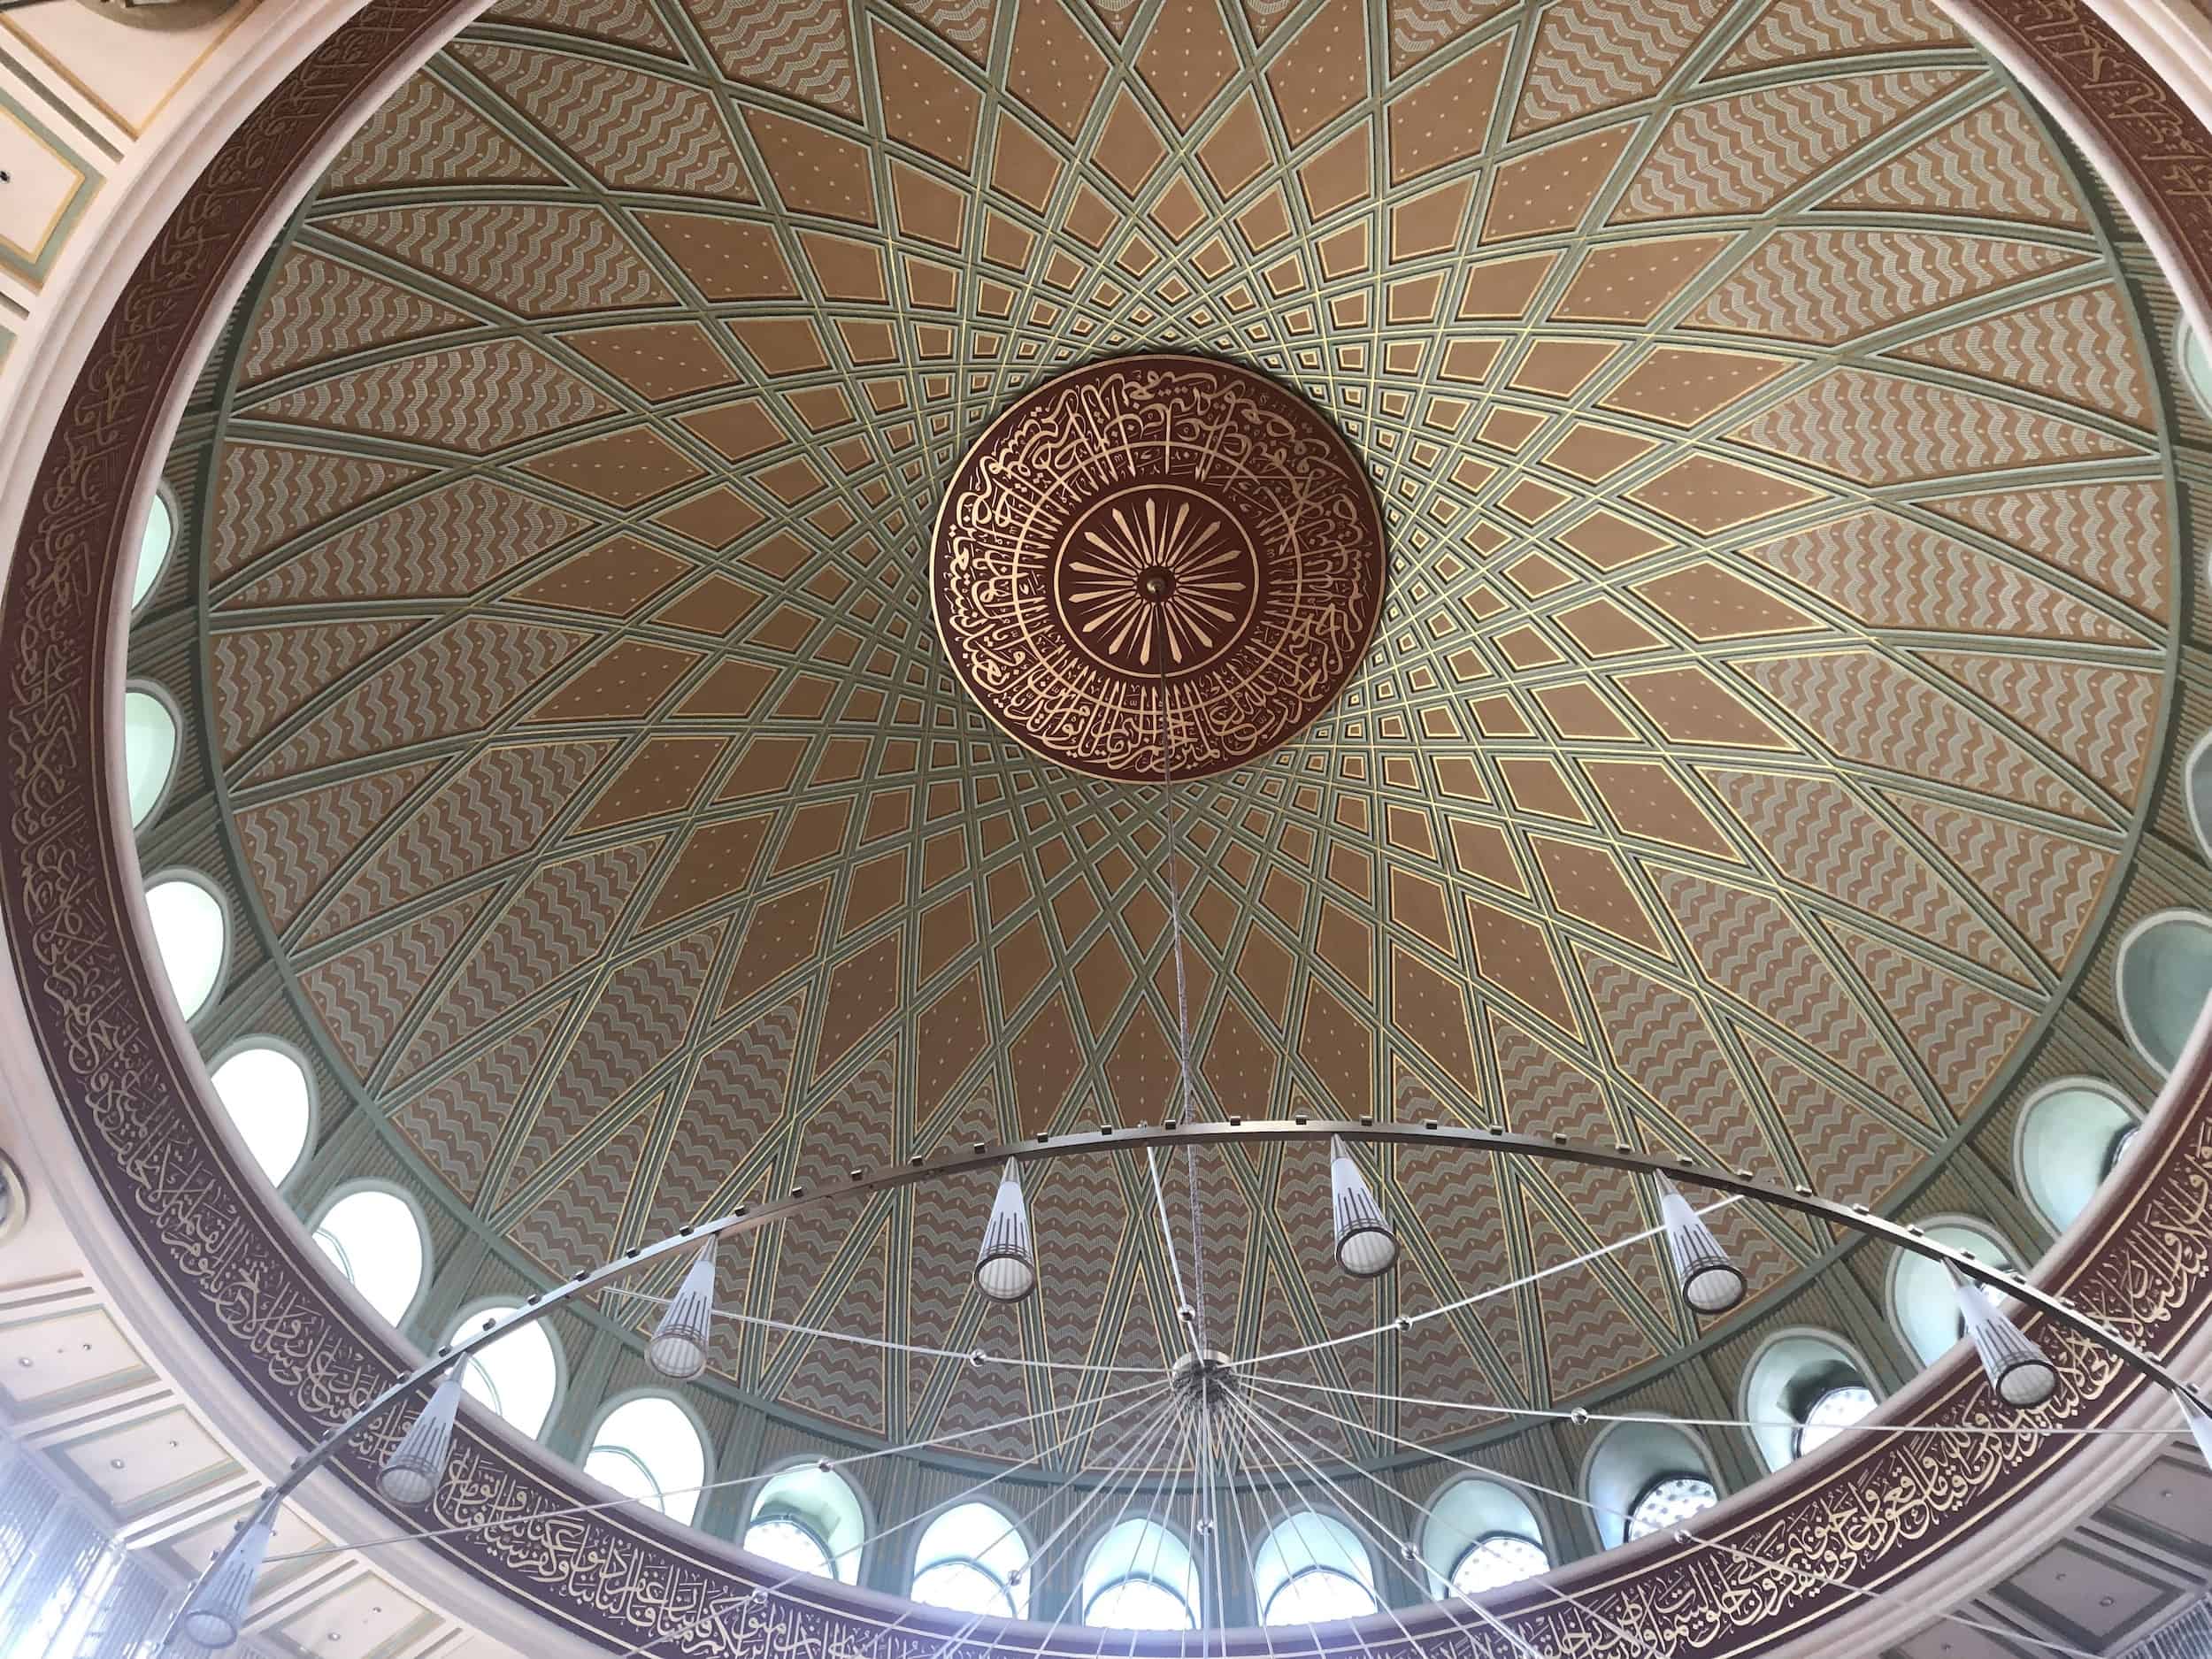 Dome of Taksim Mosque